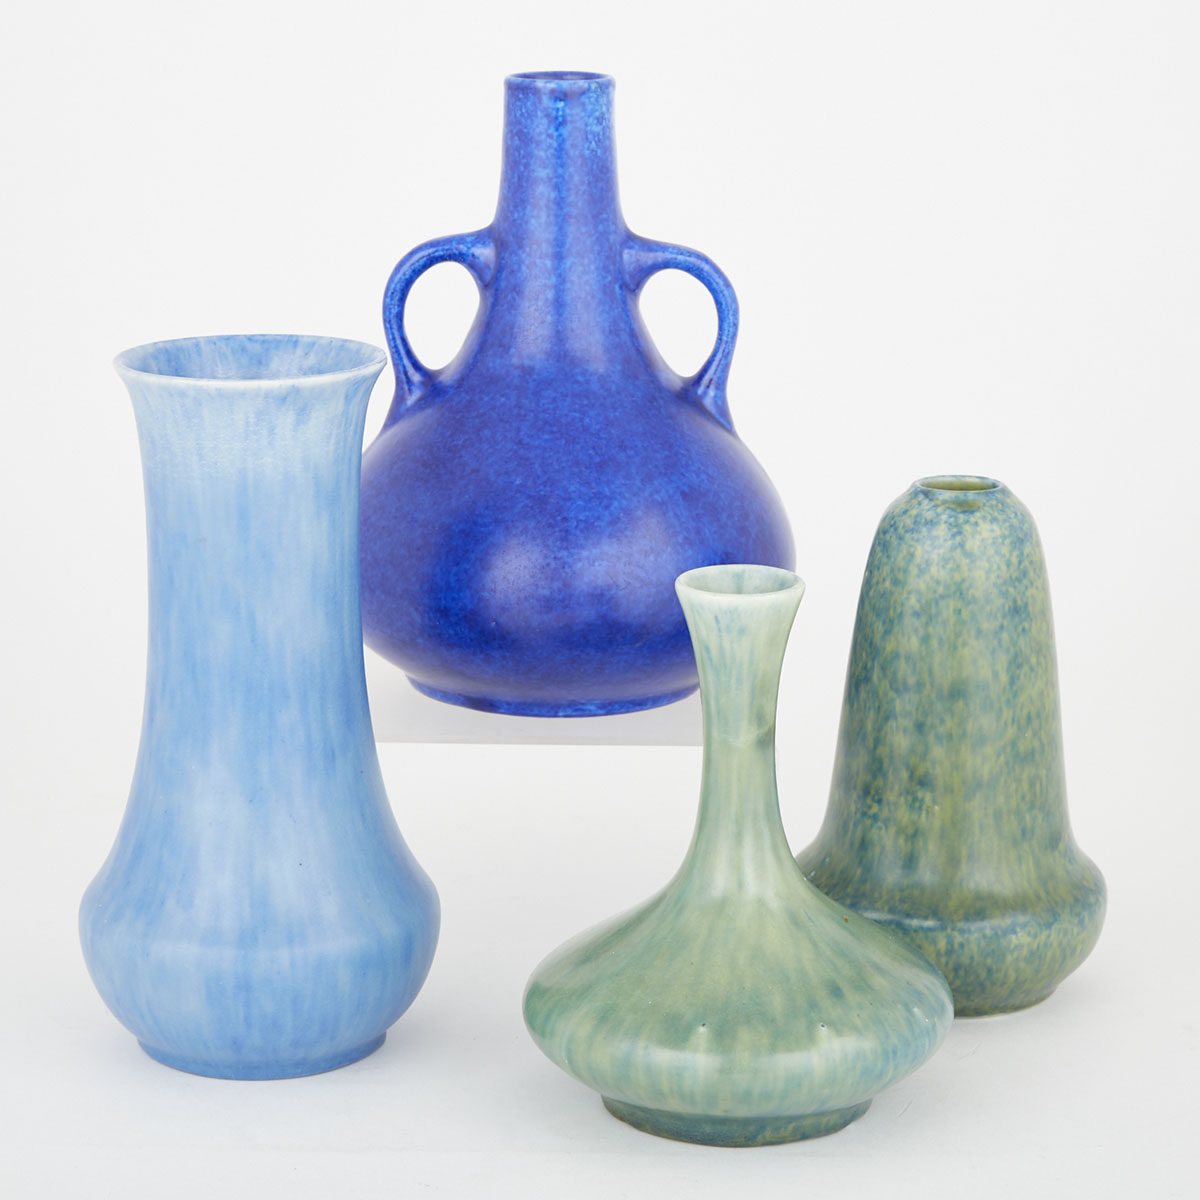 Four Clews ‘Chameleon Ware’ Vases, early 20th century